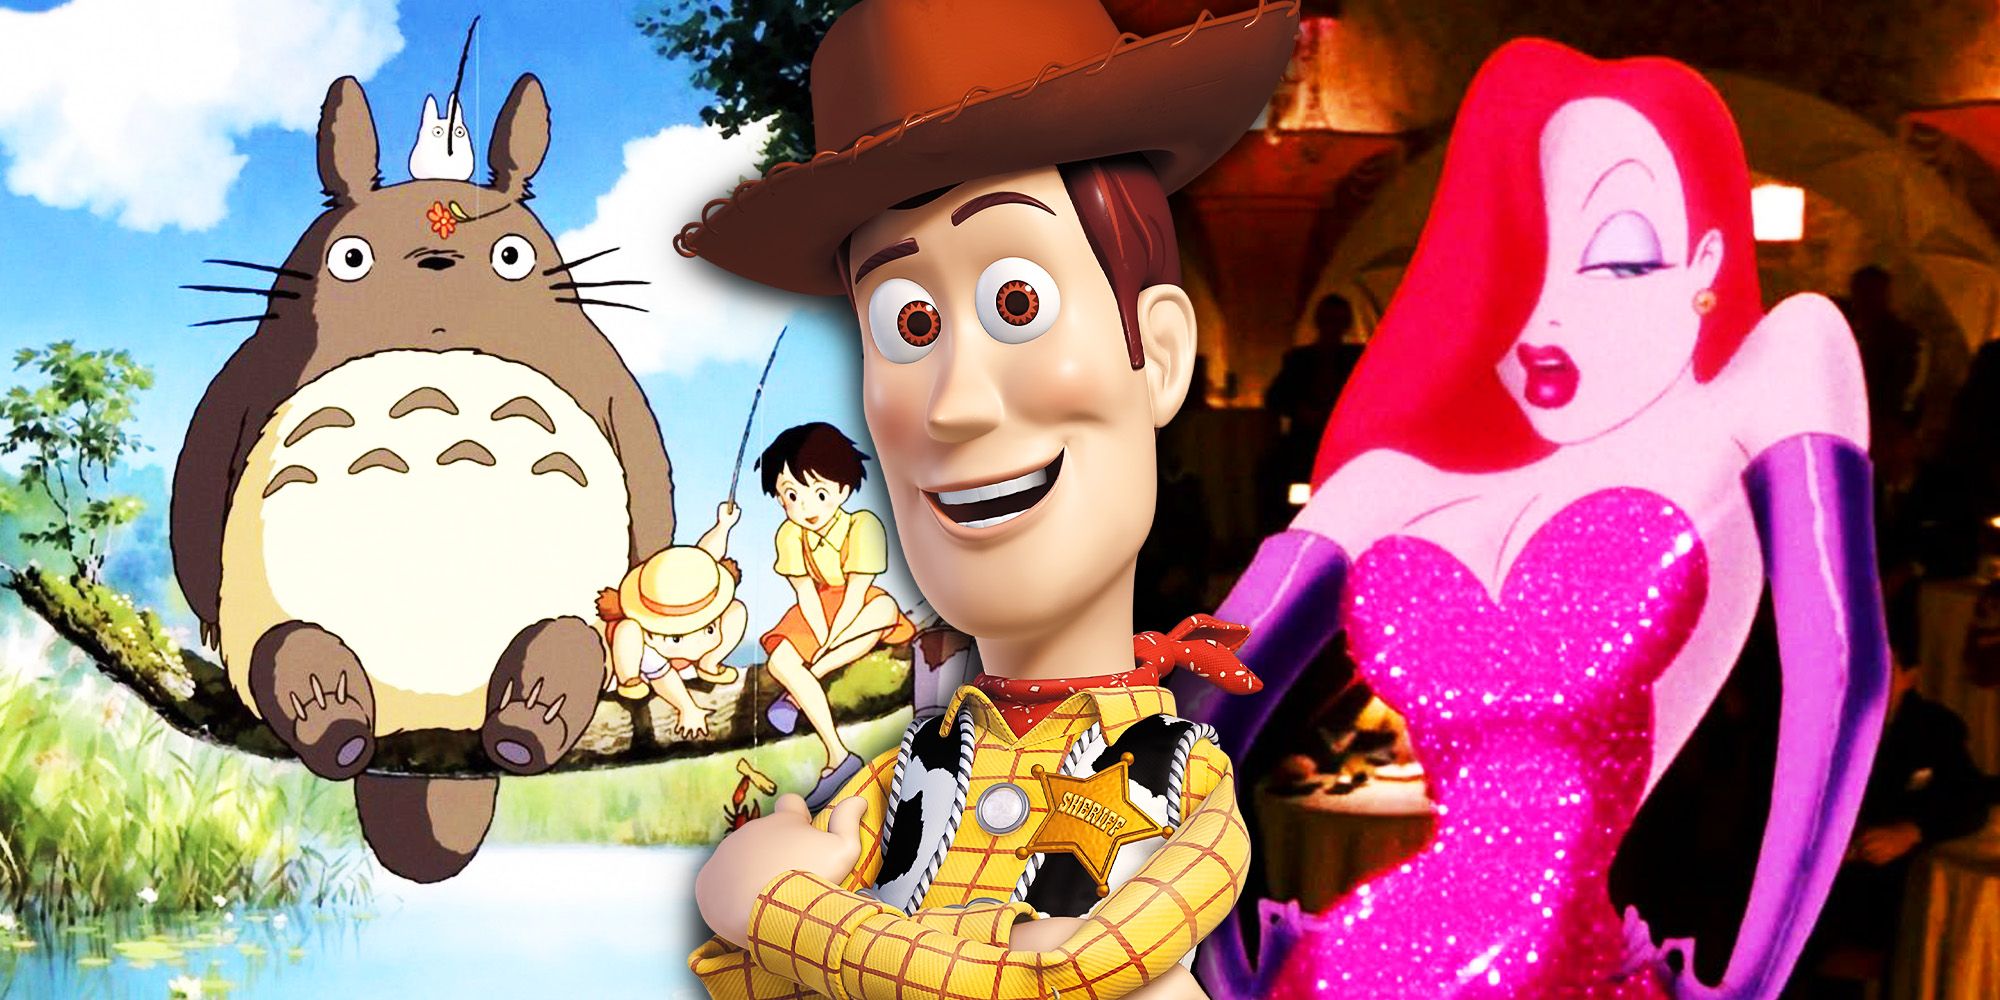 Woody from Toy Story, Totoro and Jessica Rabbit